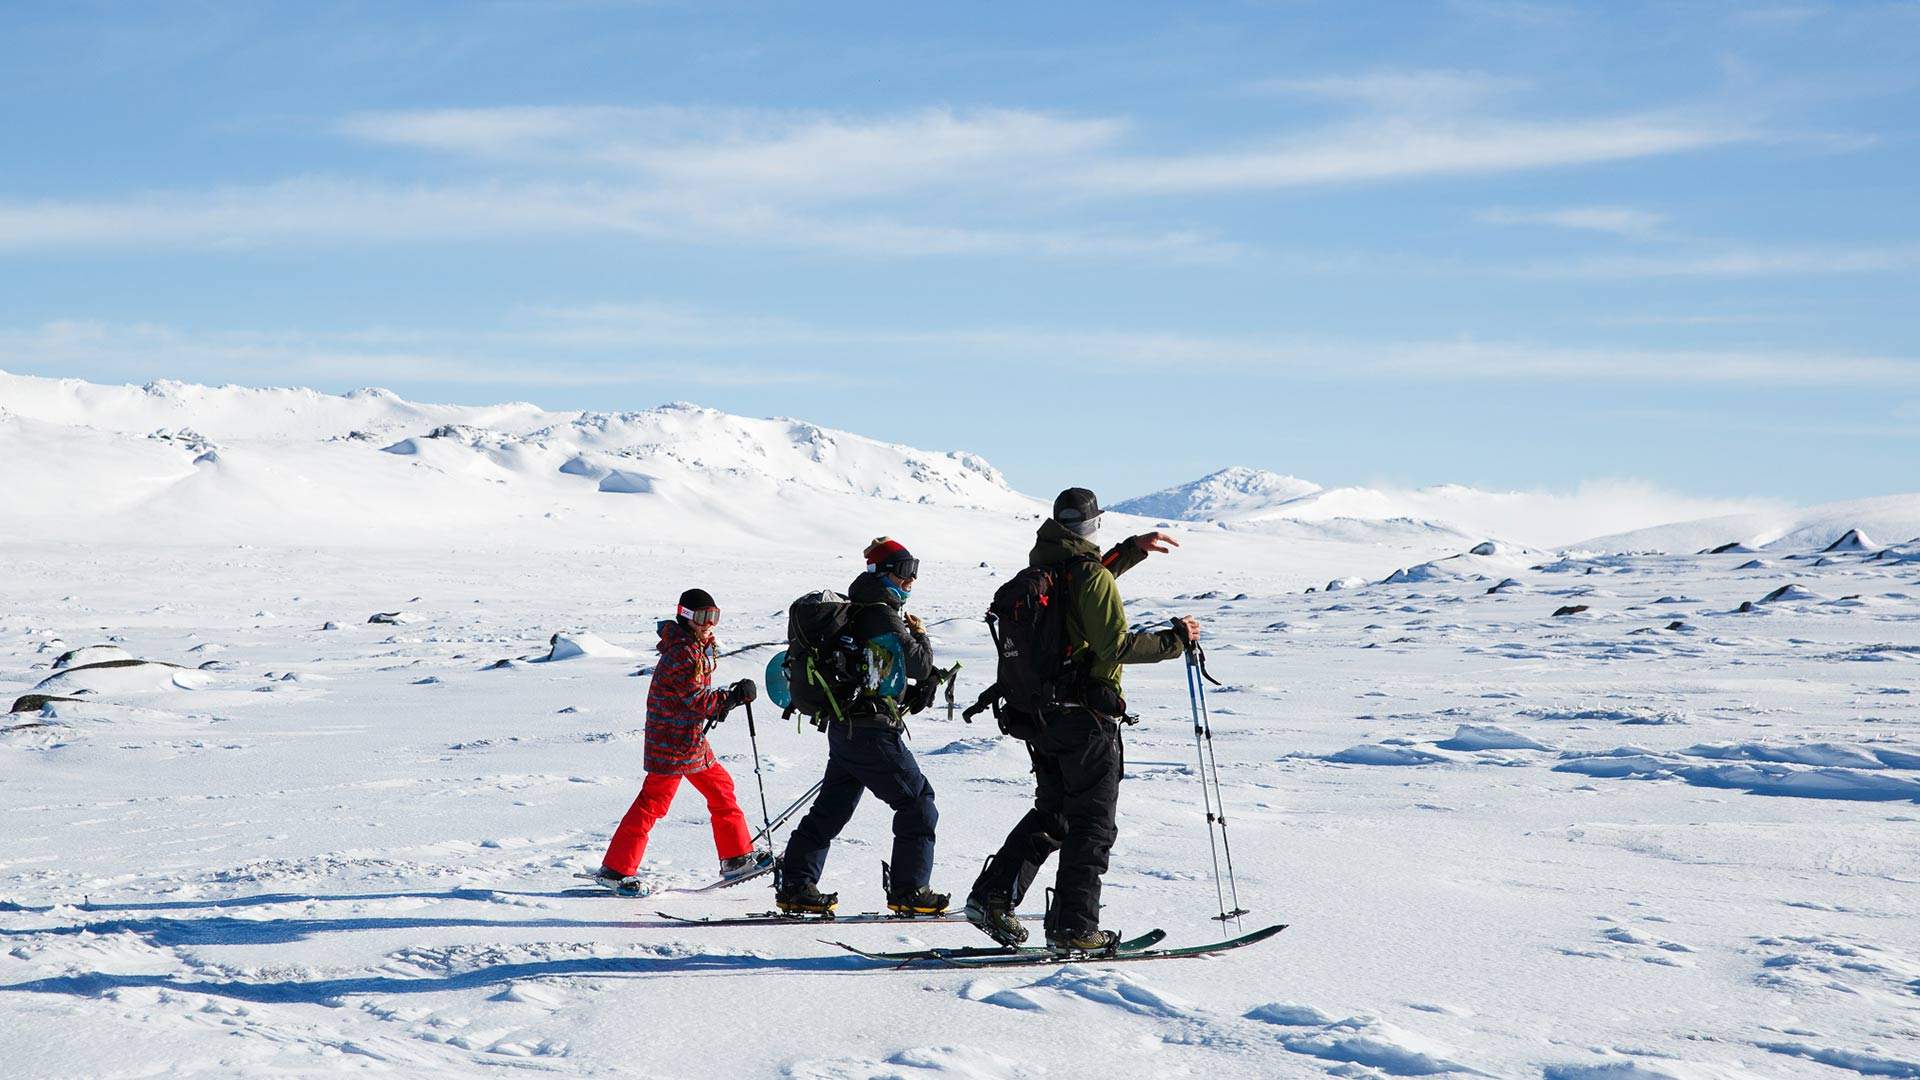 Five Backcountry Adventures to Take in Thredbo This Winter